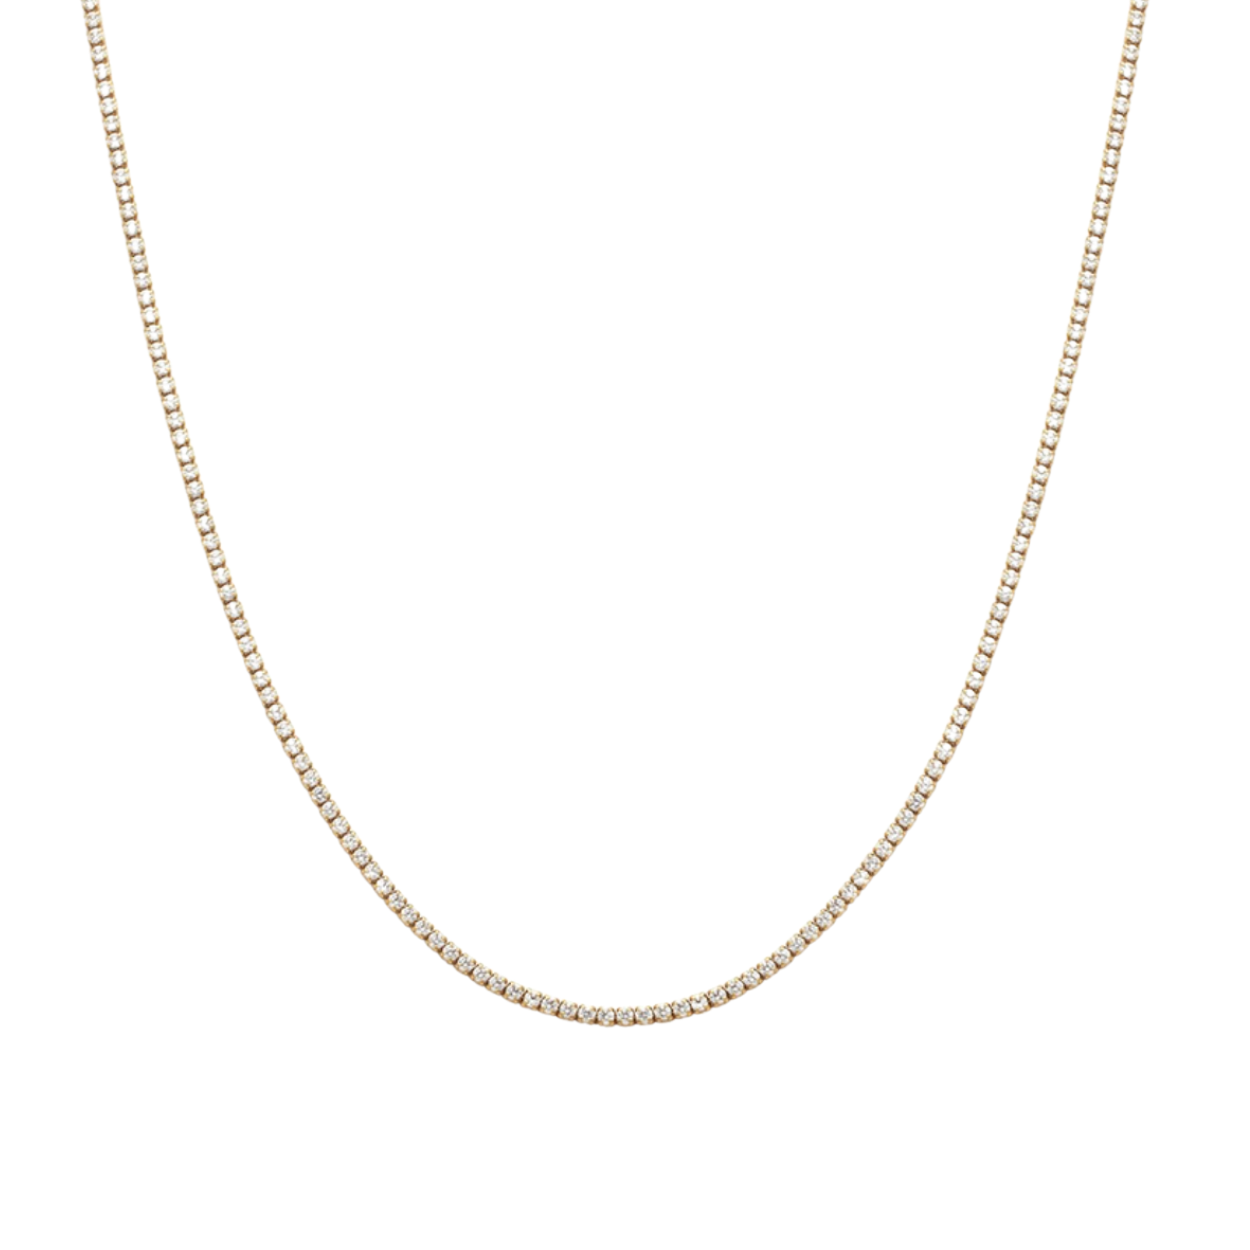 A Tiffany necklace with 14K gold plating and a delicate pendant